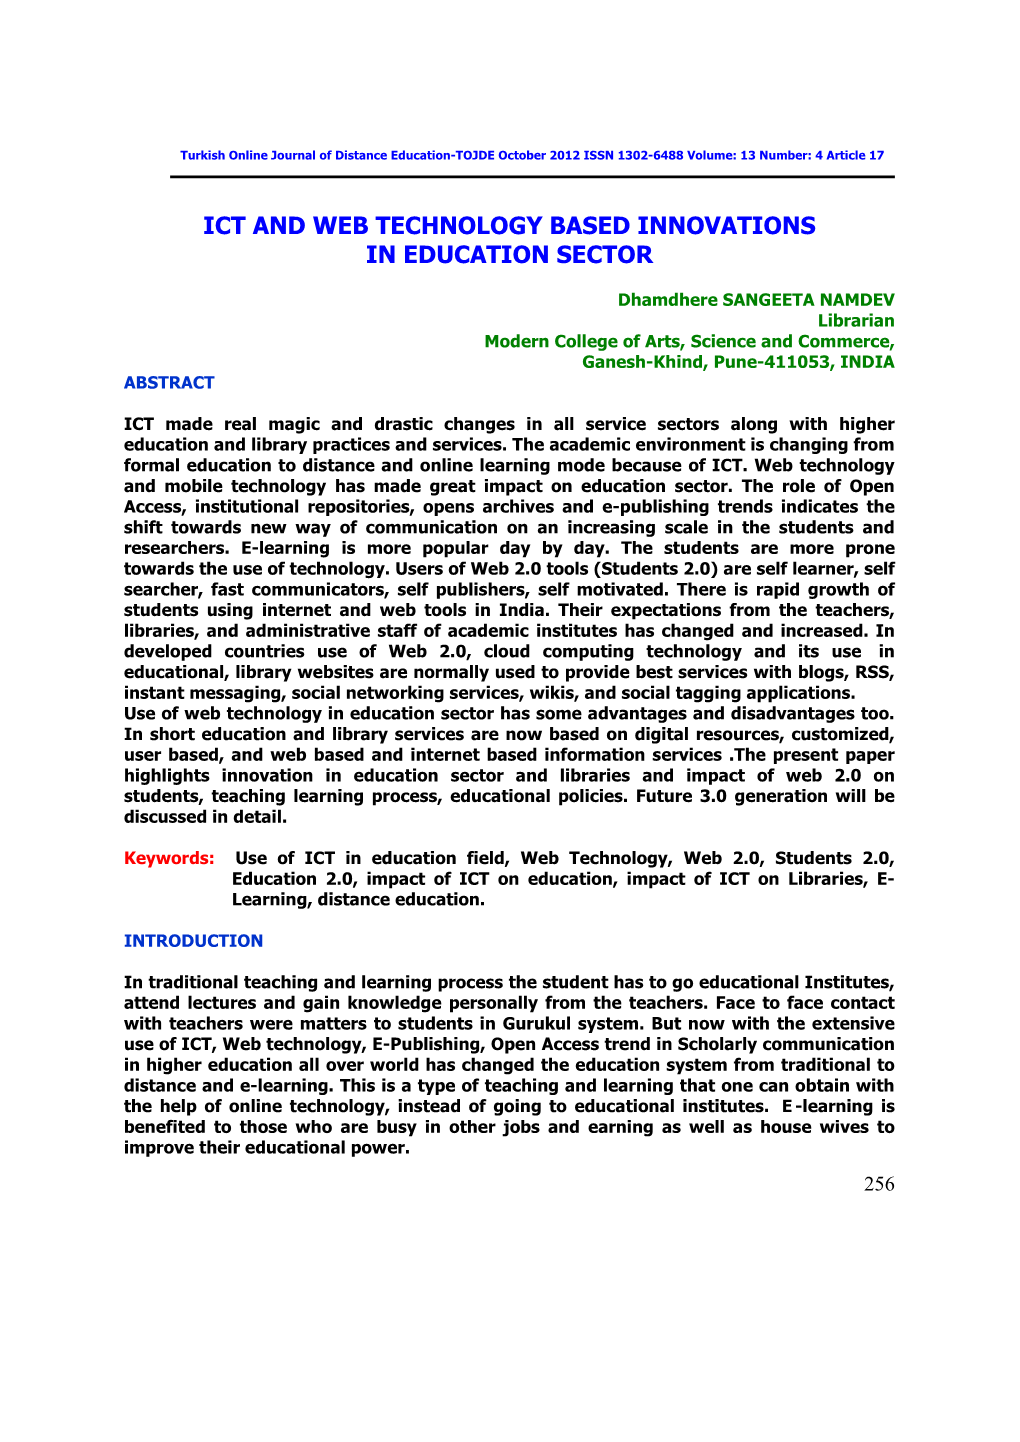 Ict and Web Technology Based Innovations in Education Sector